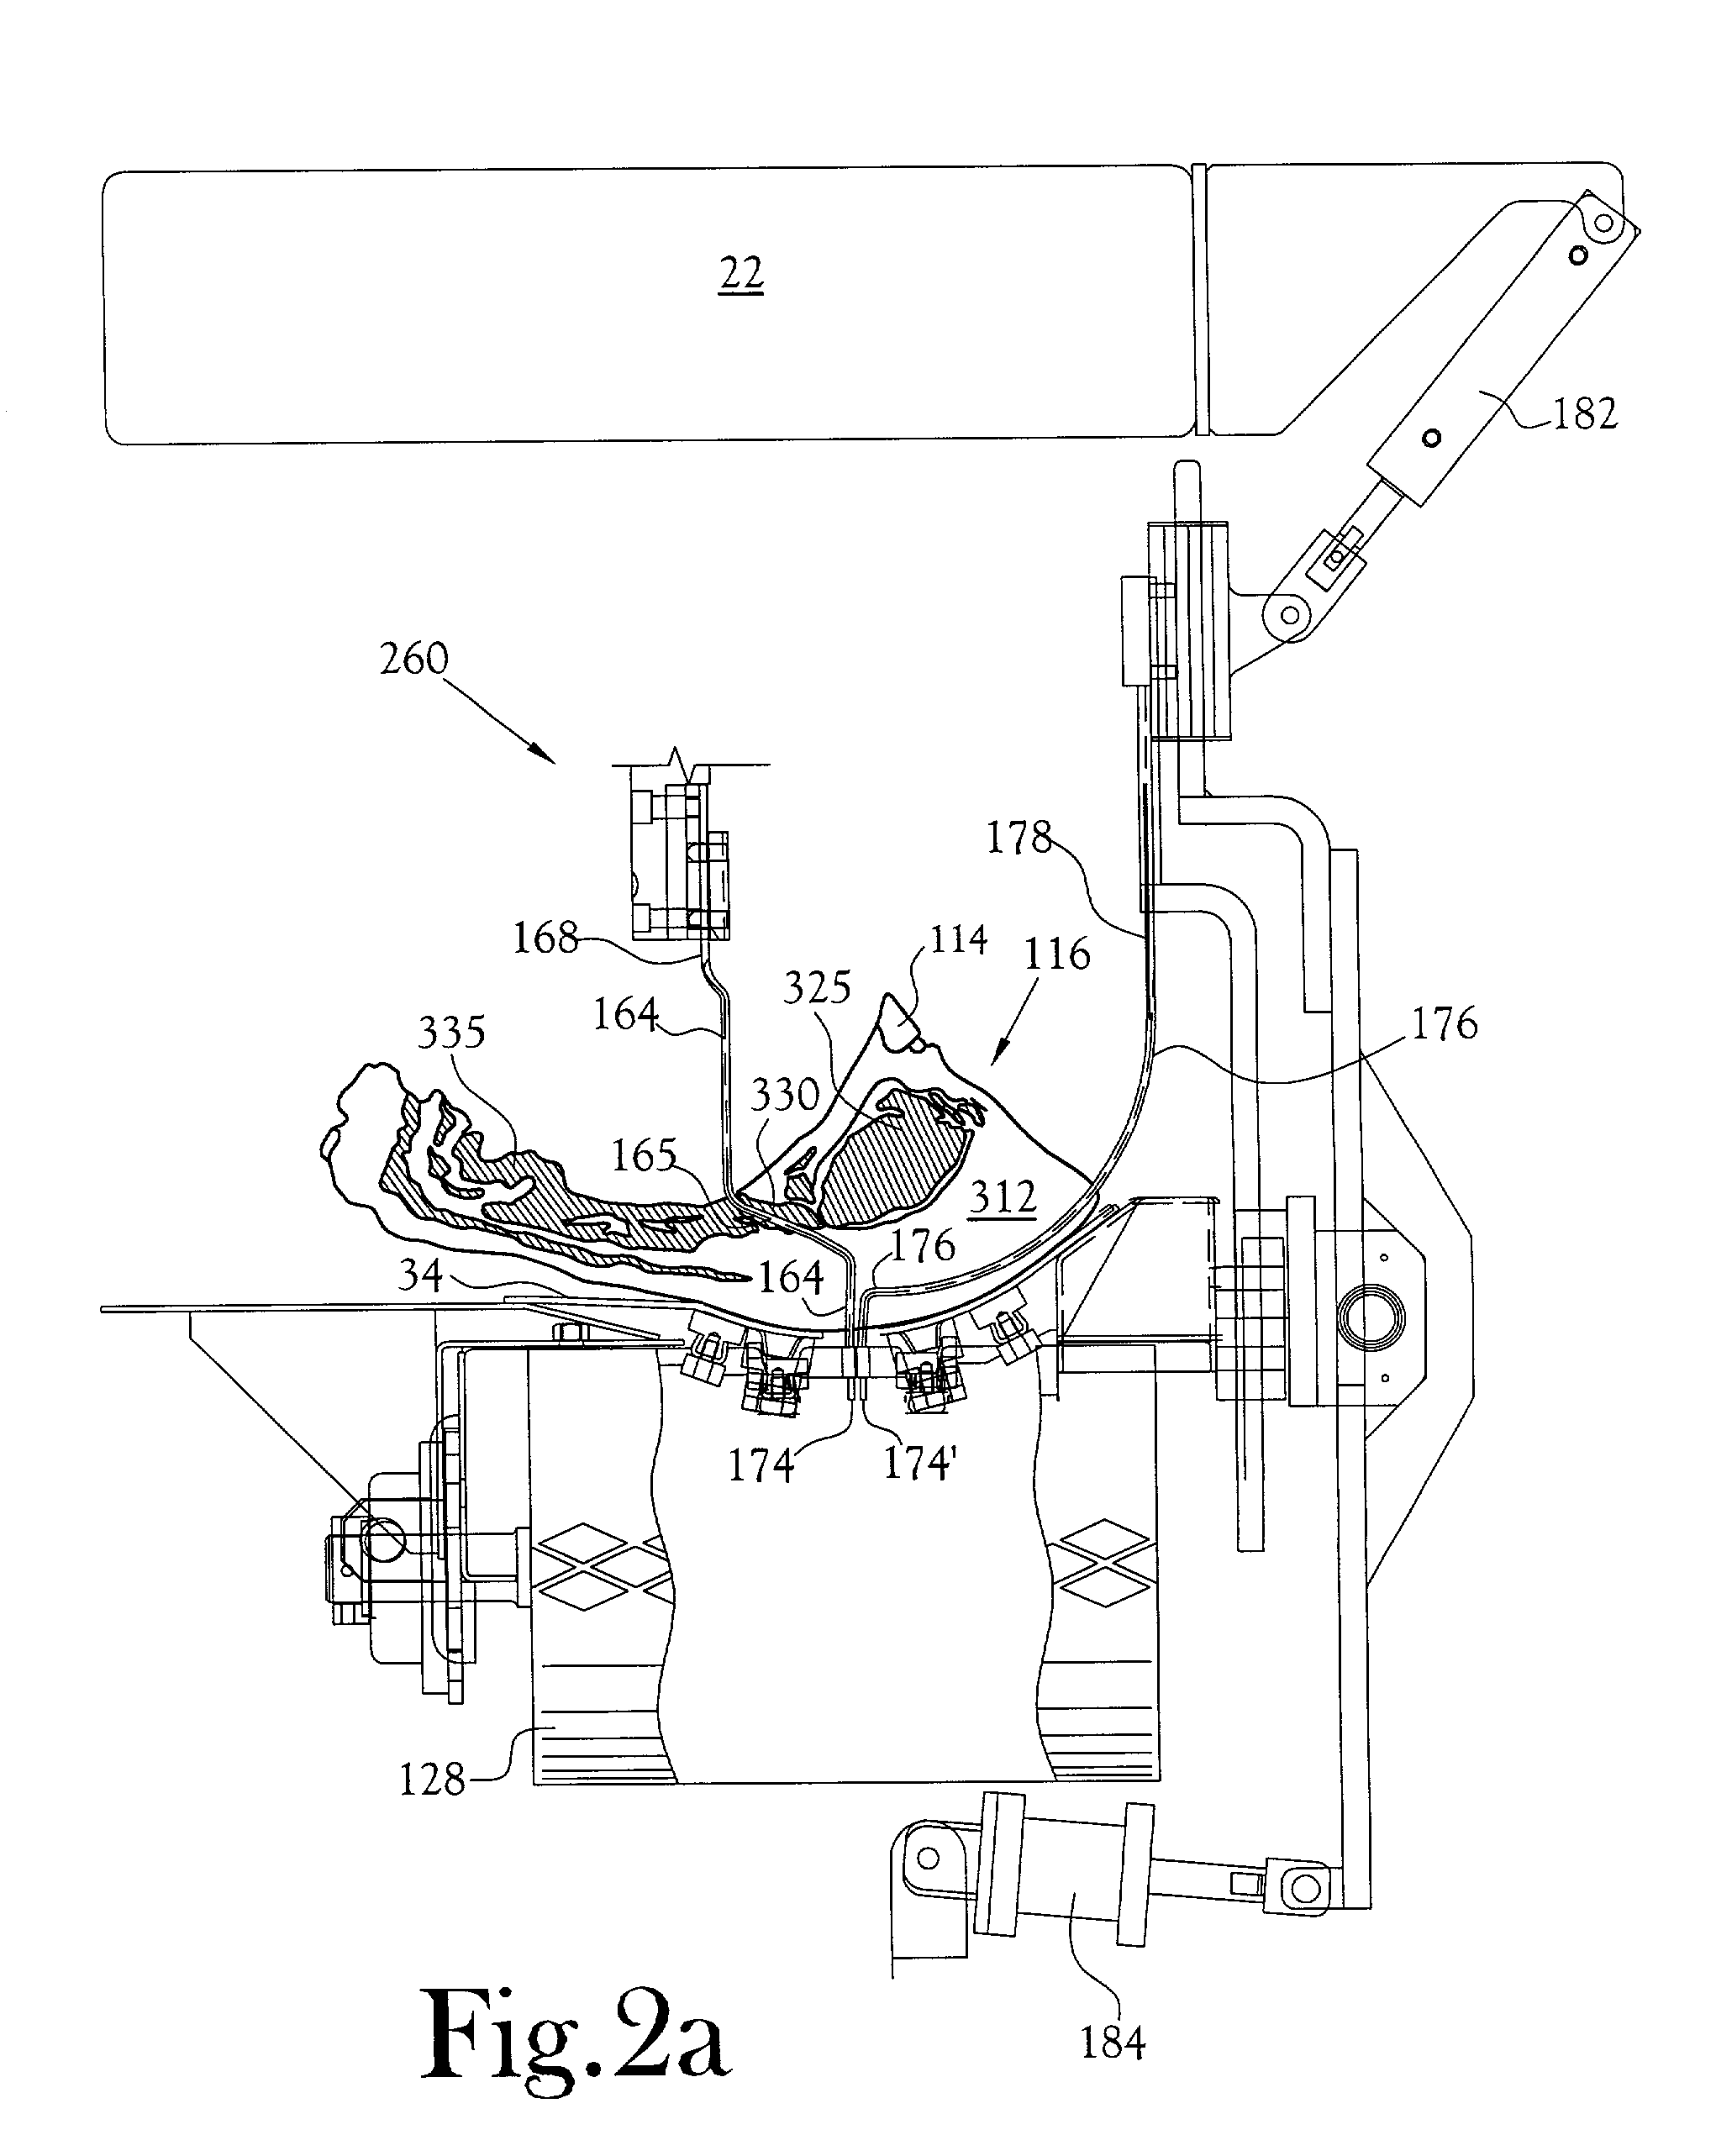 Dual blade loin knife assembly for automatic loin puller apparatus